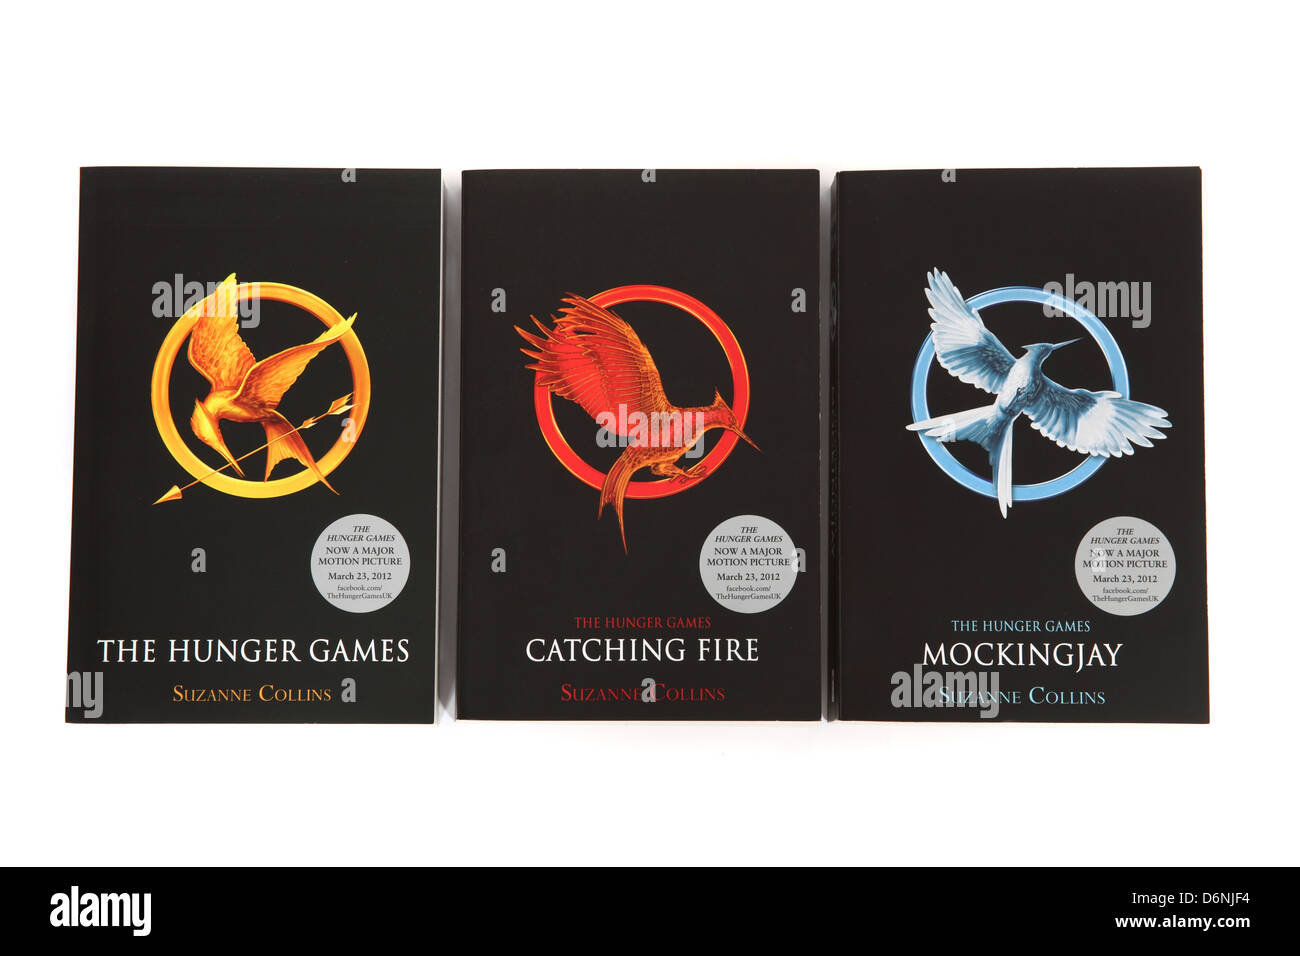 what is the hunger games series about